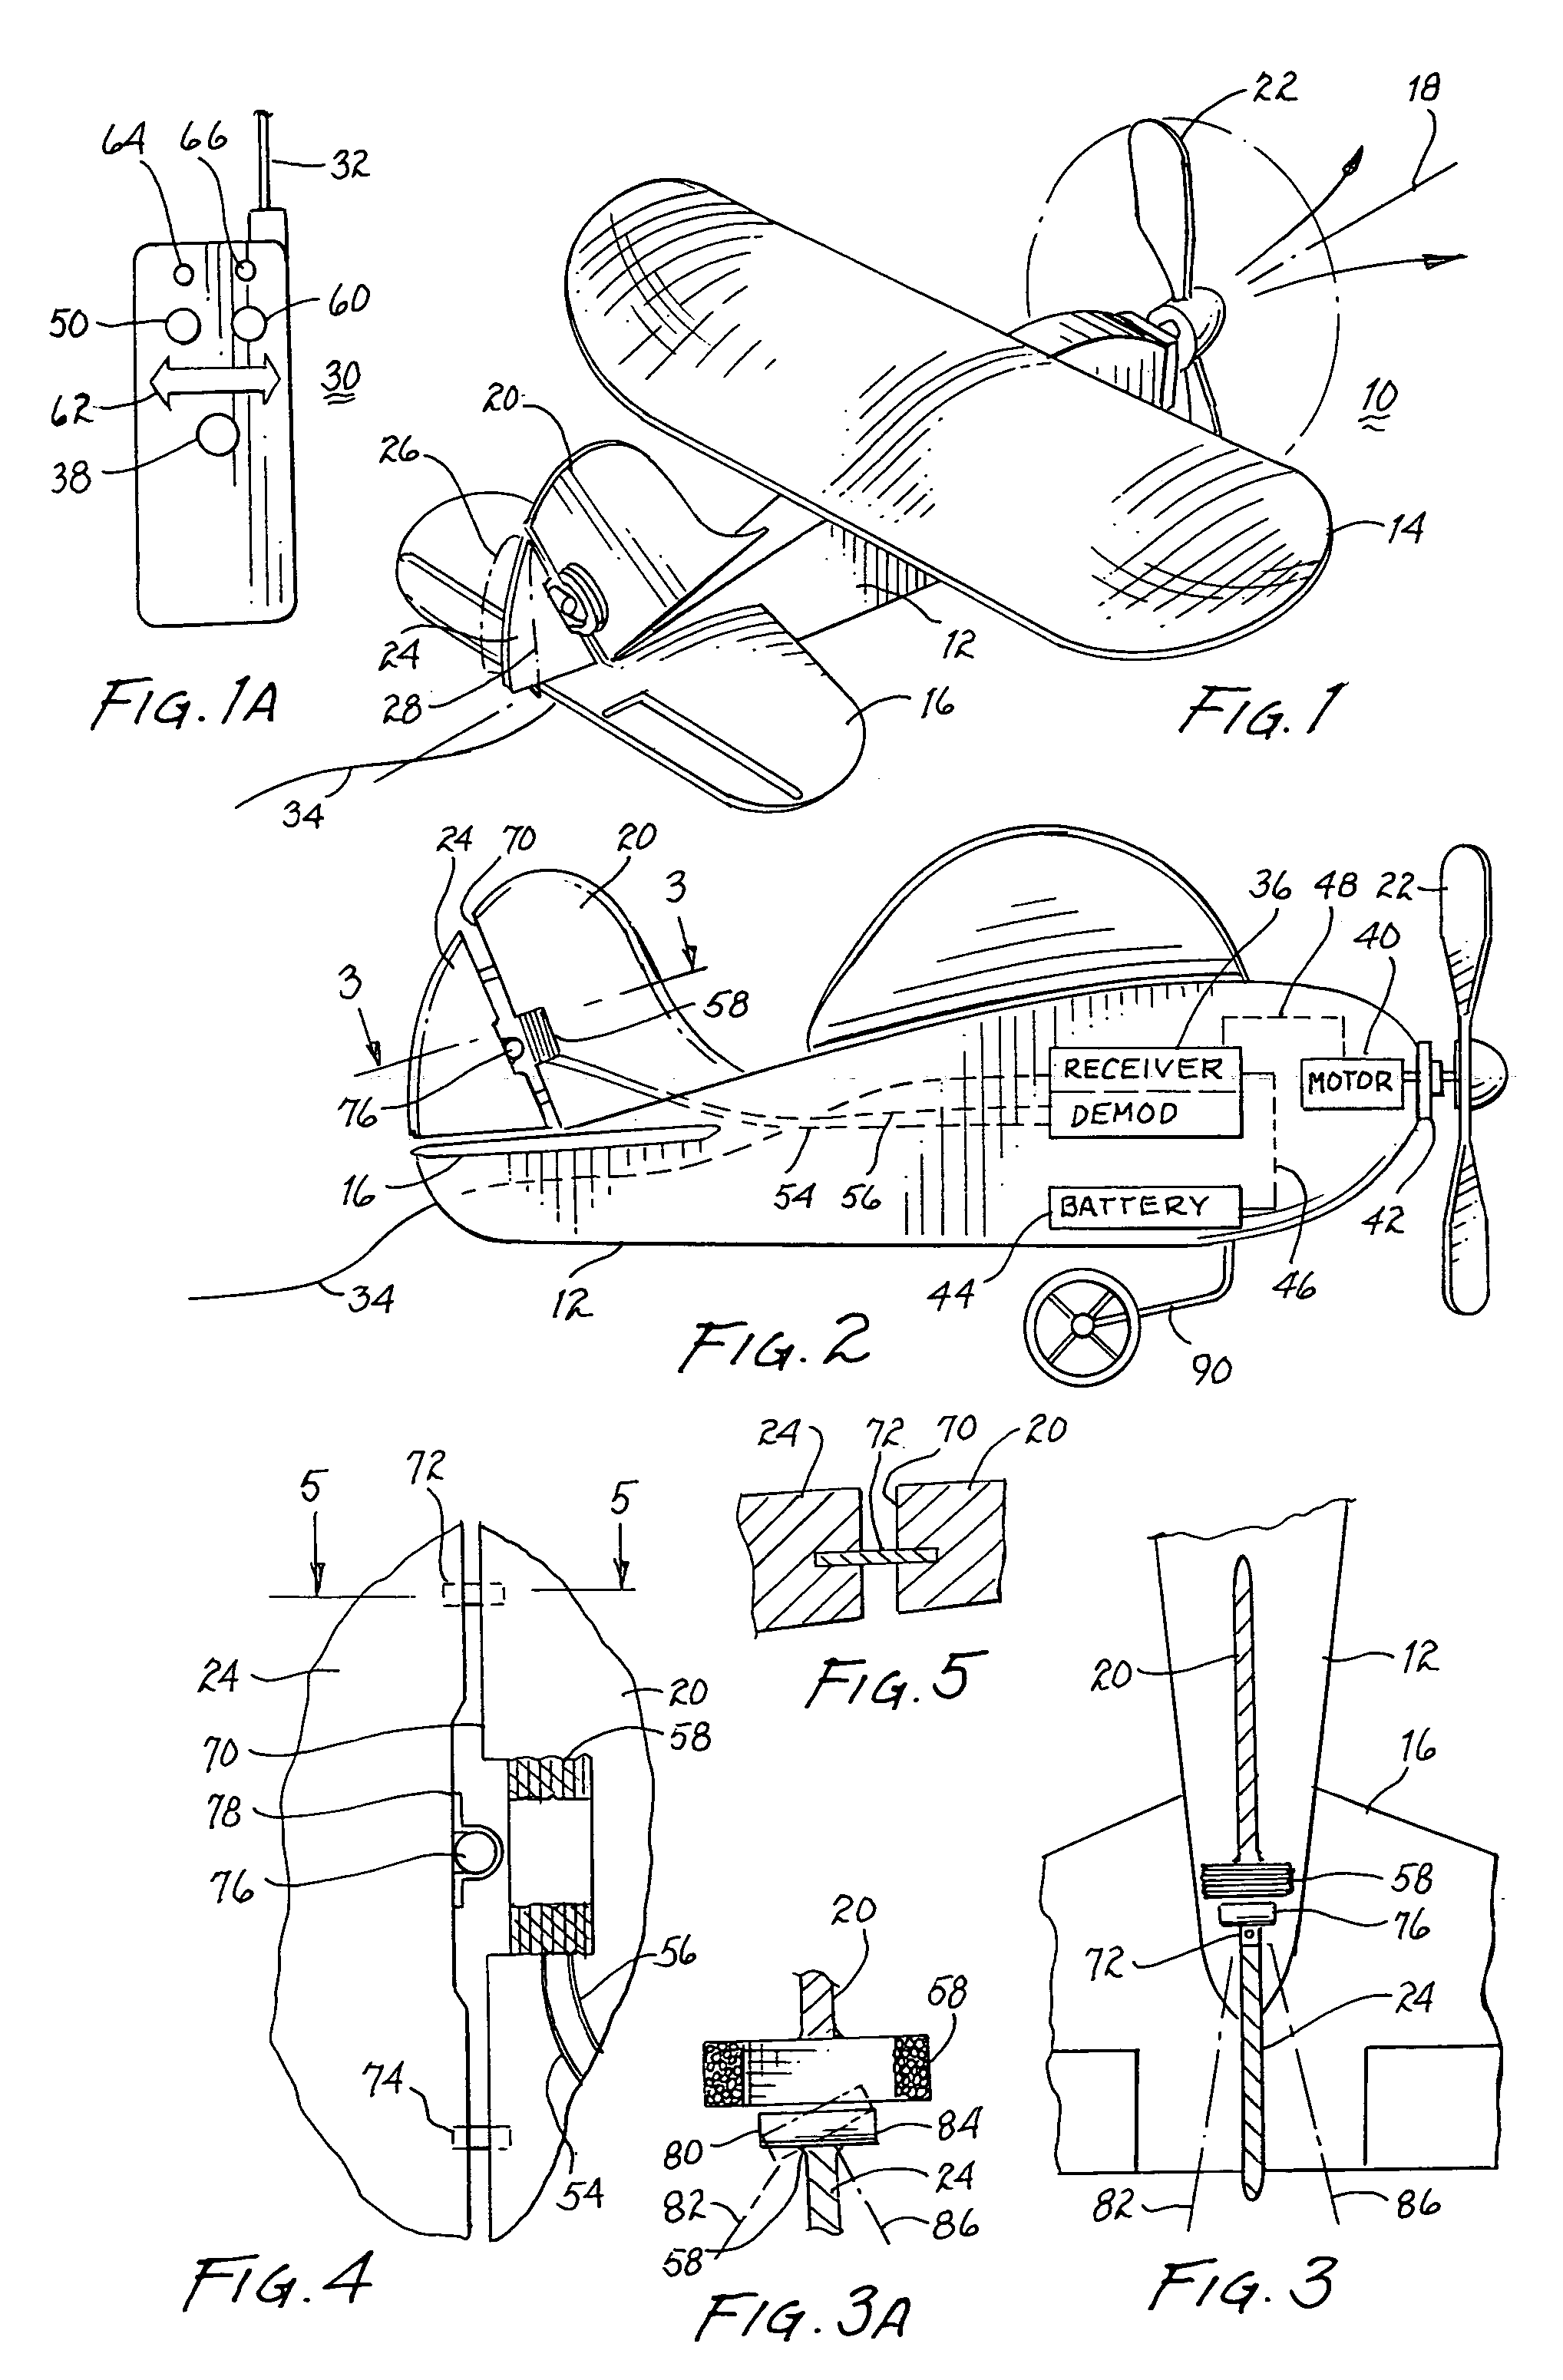 Remotely controlled model airplane having deflectable centrally biased control surface